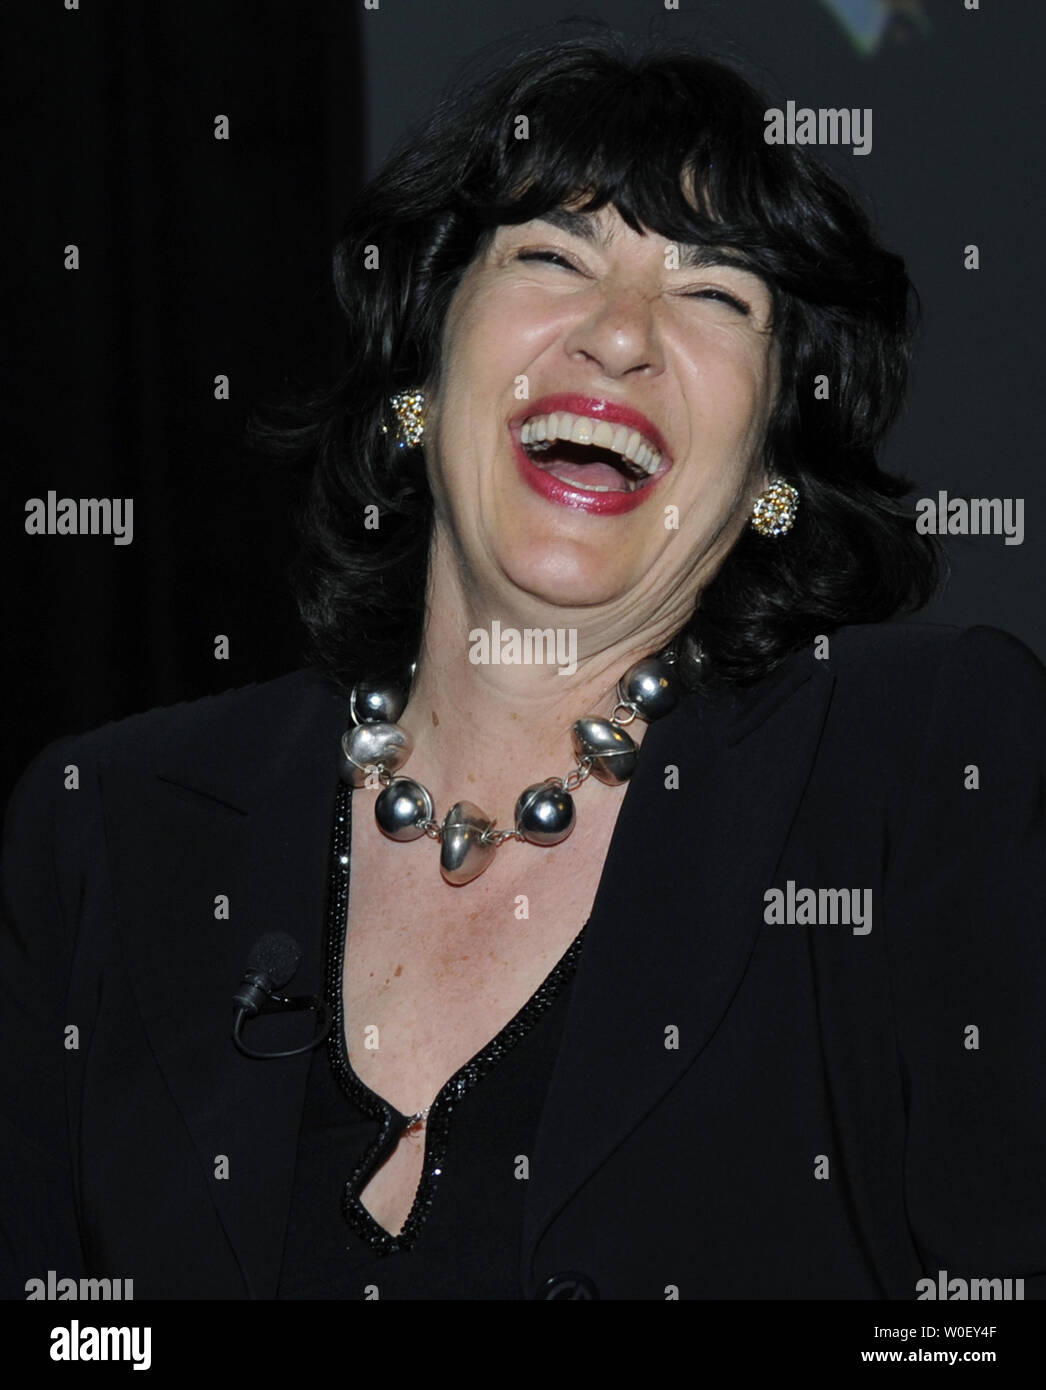 CNN Chief International Correspondent Christiane Amanpour laughs as she interviews Ted Turner at the 30th Anniversary Refugees International dinner at the Embassy of Italy in Washington on May 7, 2009. The organization is honoring Ted Turner for his contributions to humanitarian issues. (UPI Photo/Alexis C. Glenn) Stock Photo